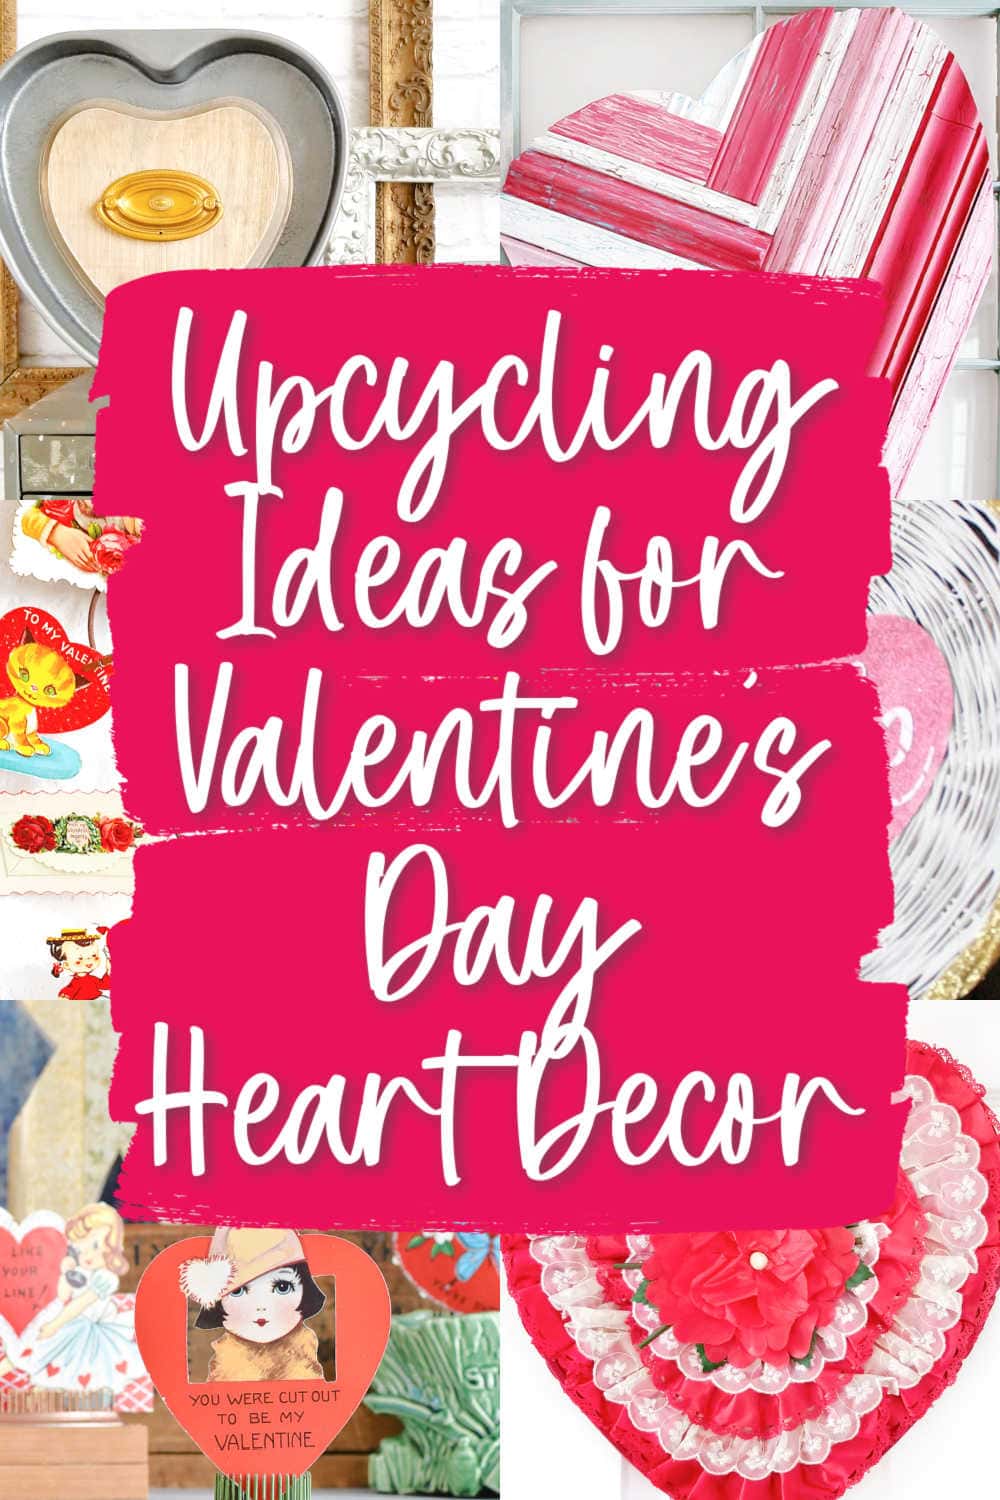 valentine crafts for adults